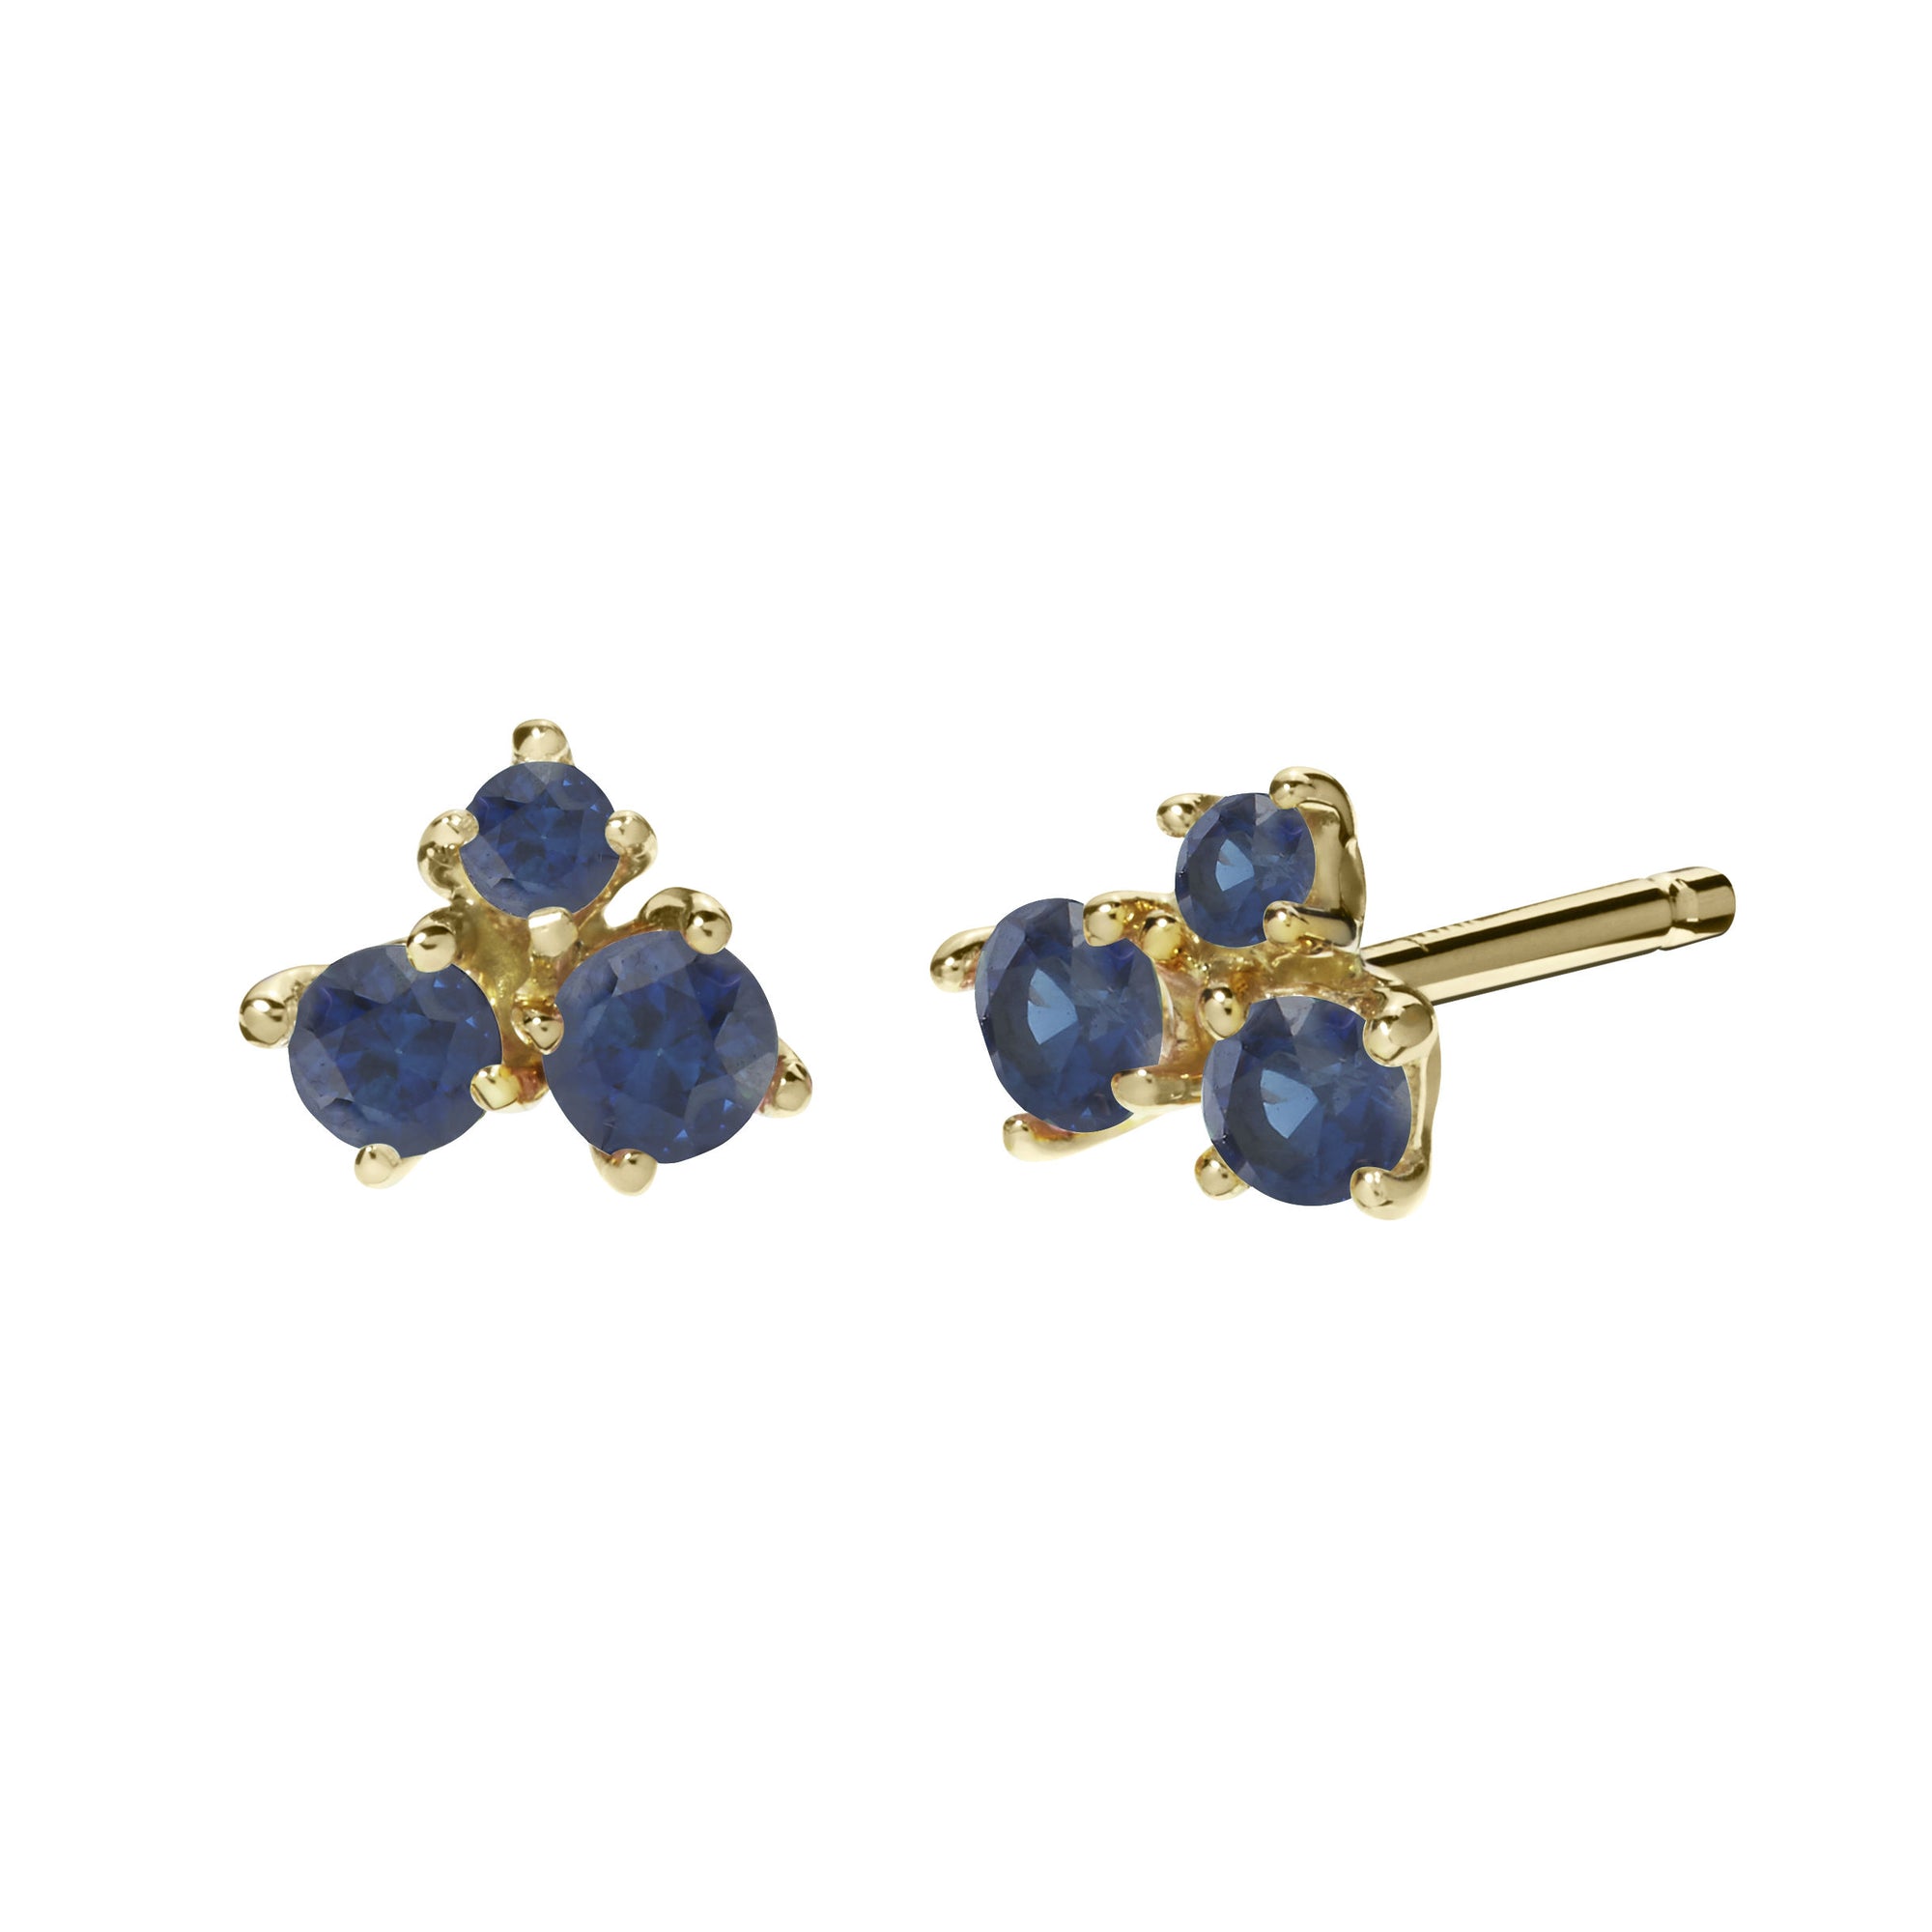 classic solitaire stud earrings with blue sapphires in 18k yellow gold by finn by candice pool neistat